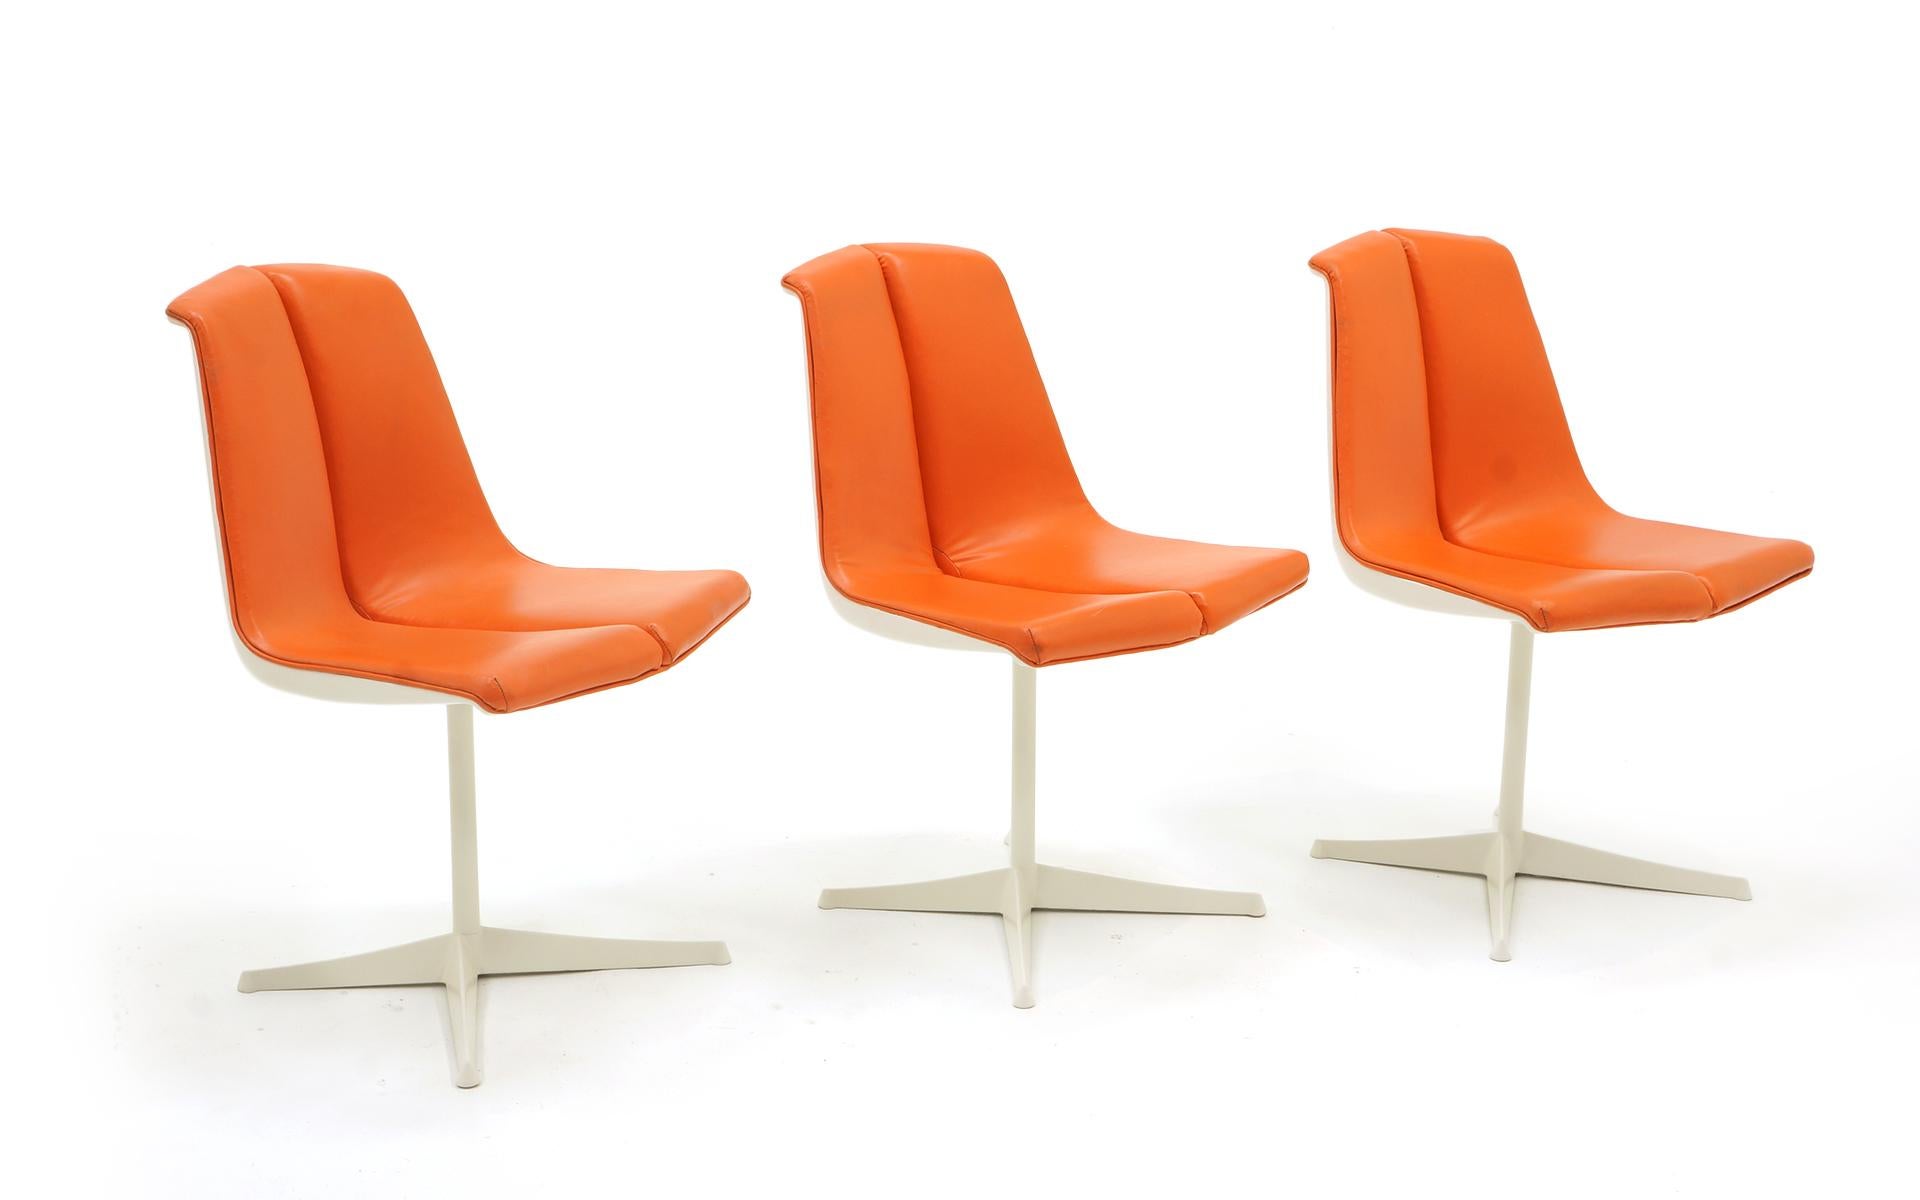 Mid-20th Century Eight Dining Chairs by Richard Schultz for Knoll. White Frames, Red Orange Seats